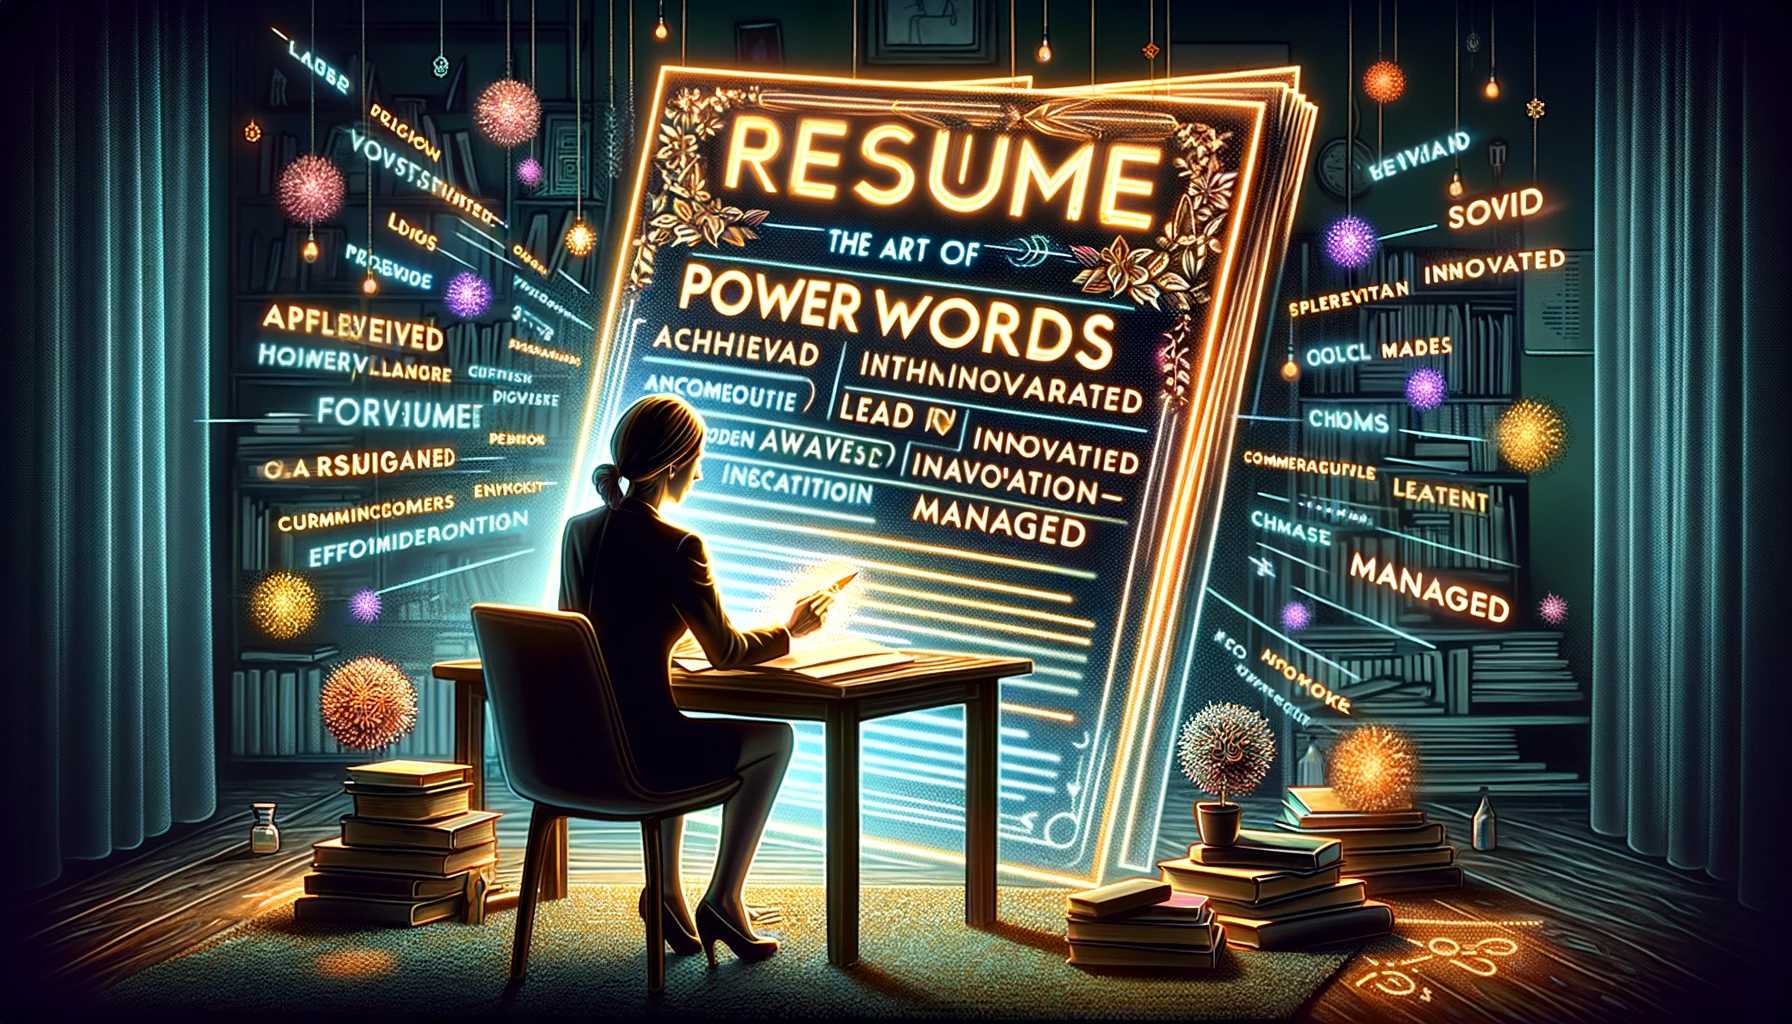 The Art of Power Words in Crafting a Standout Resume